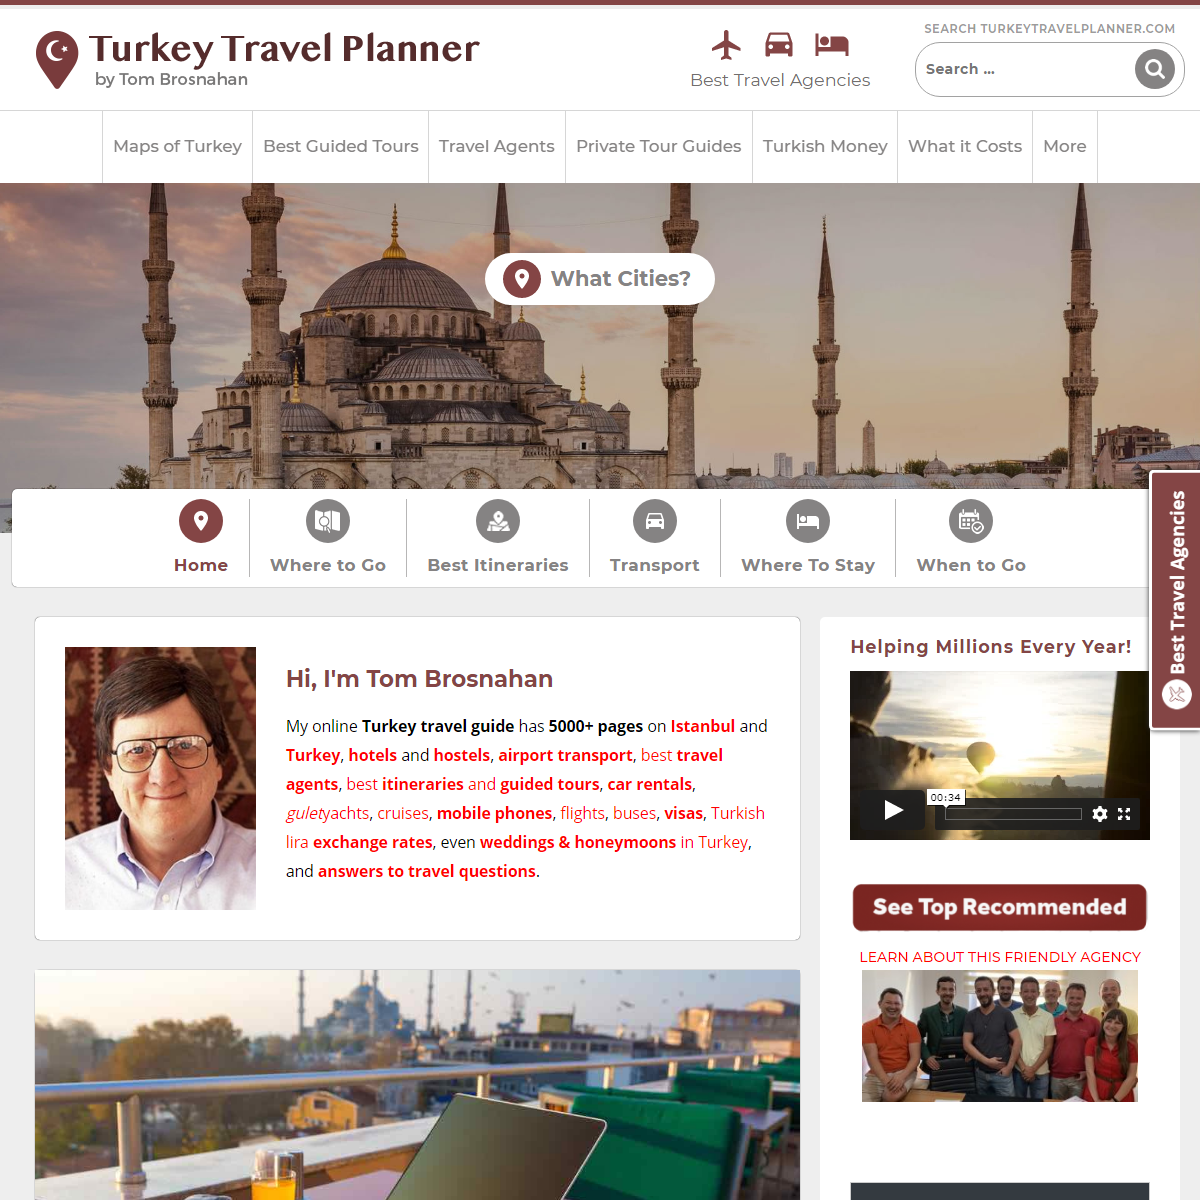 Turkey Travel Planner, best guide for planning your trip to Turkey